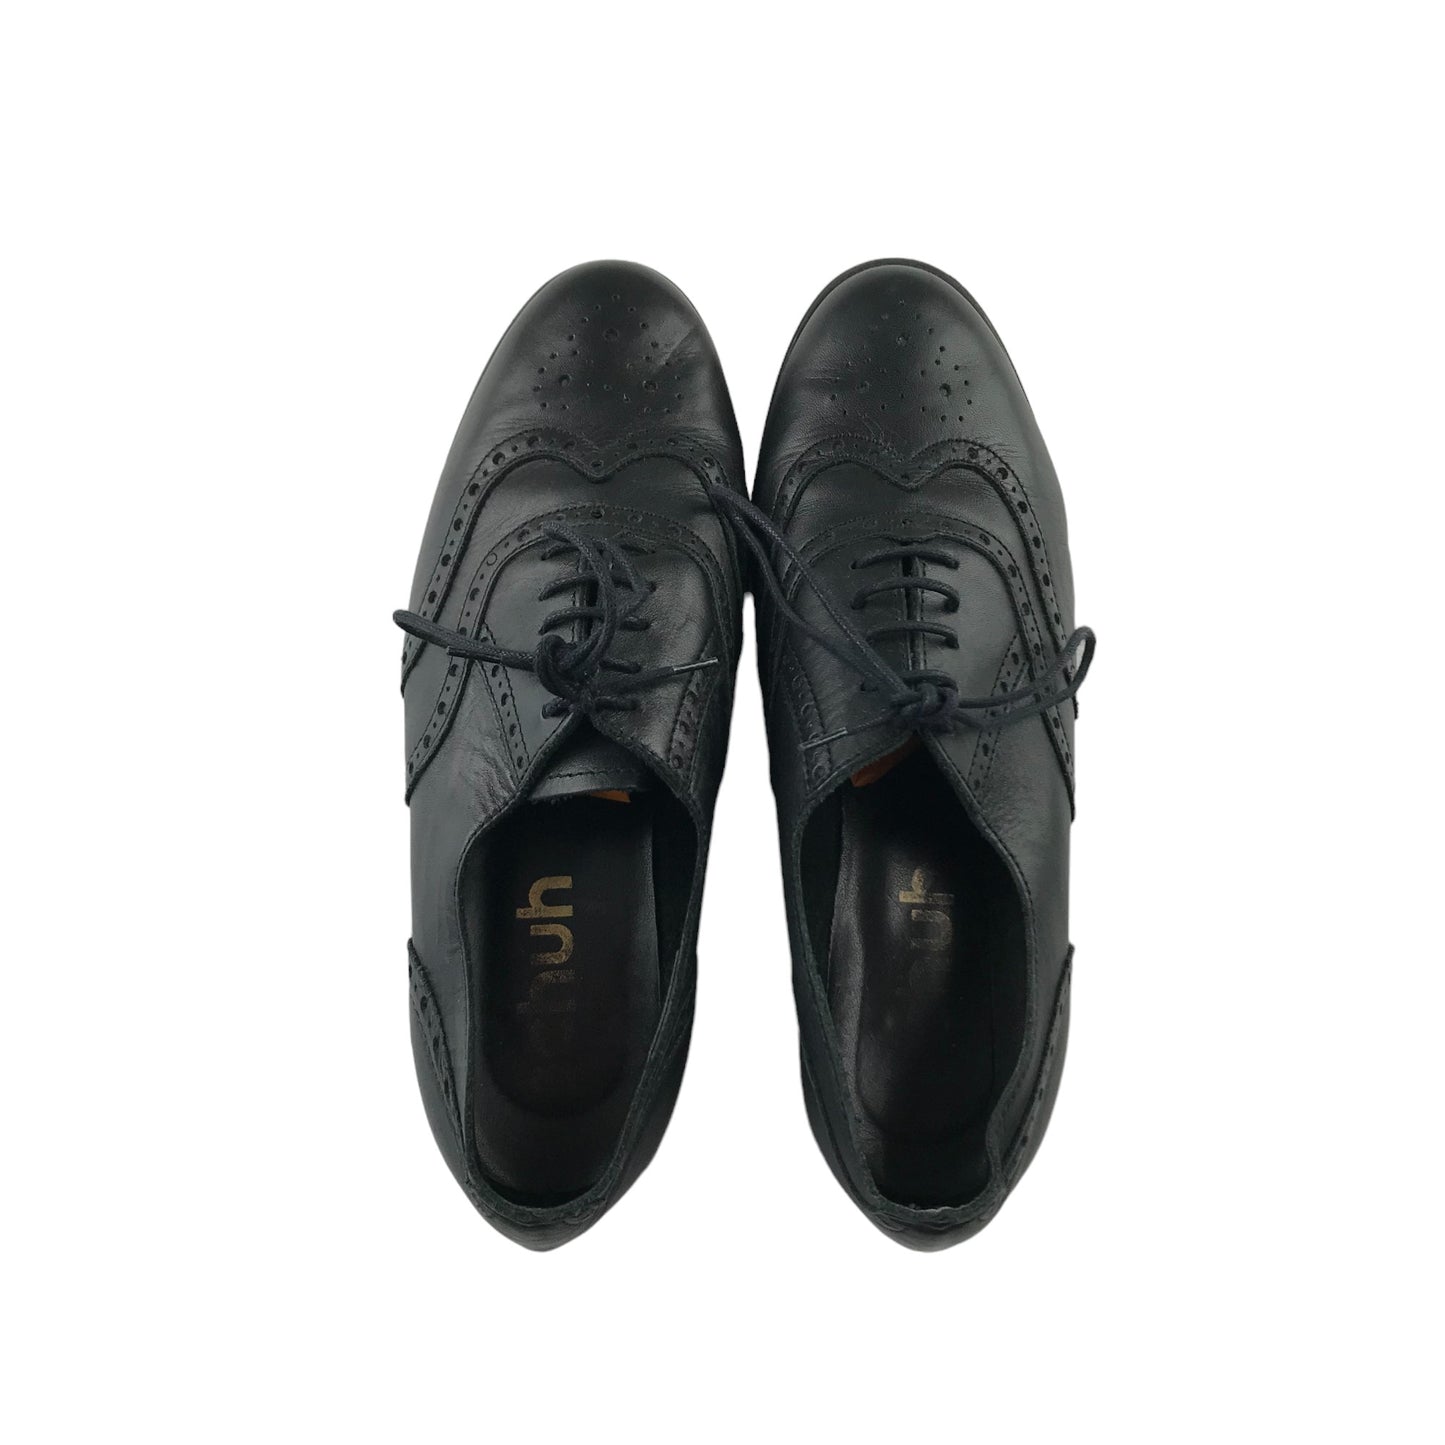 Schuh Brogue Shoe Size 6 Black With Pattern